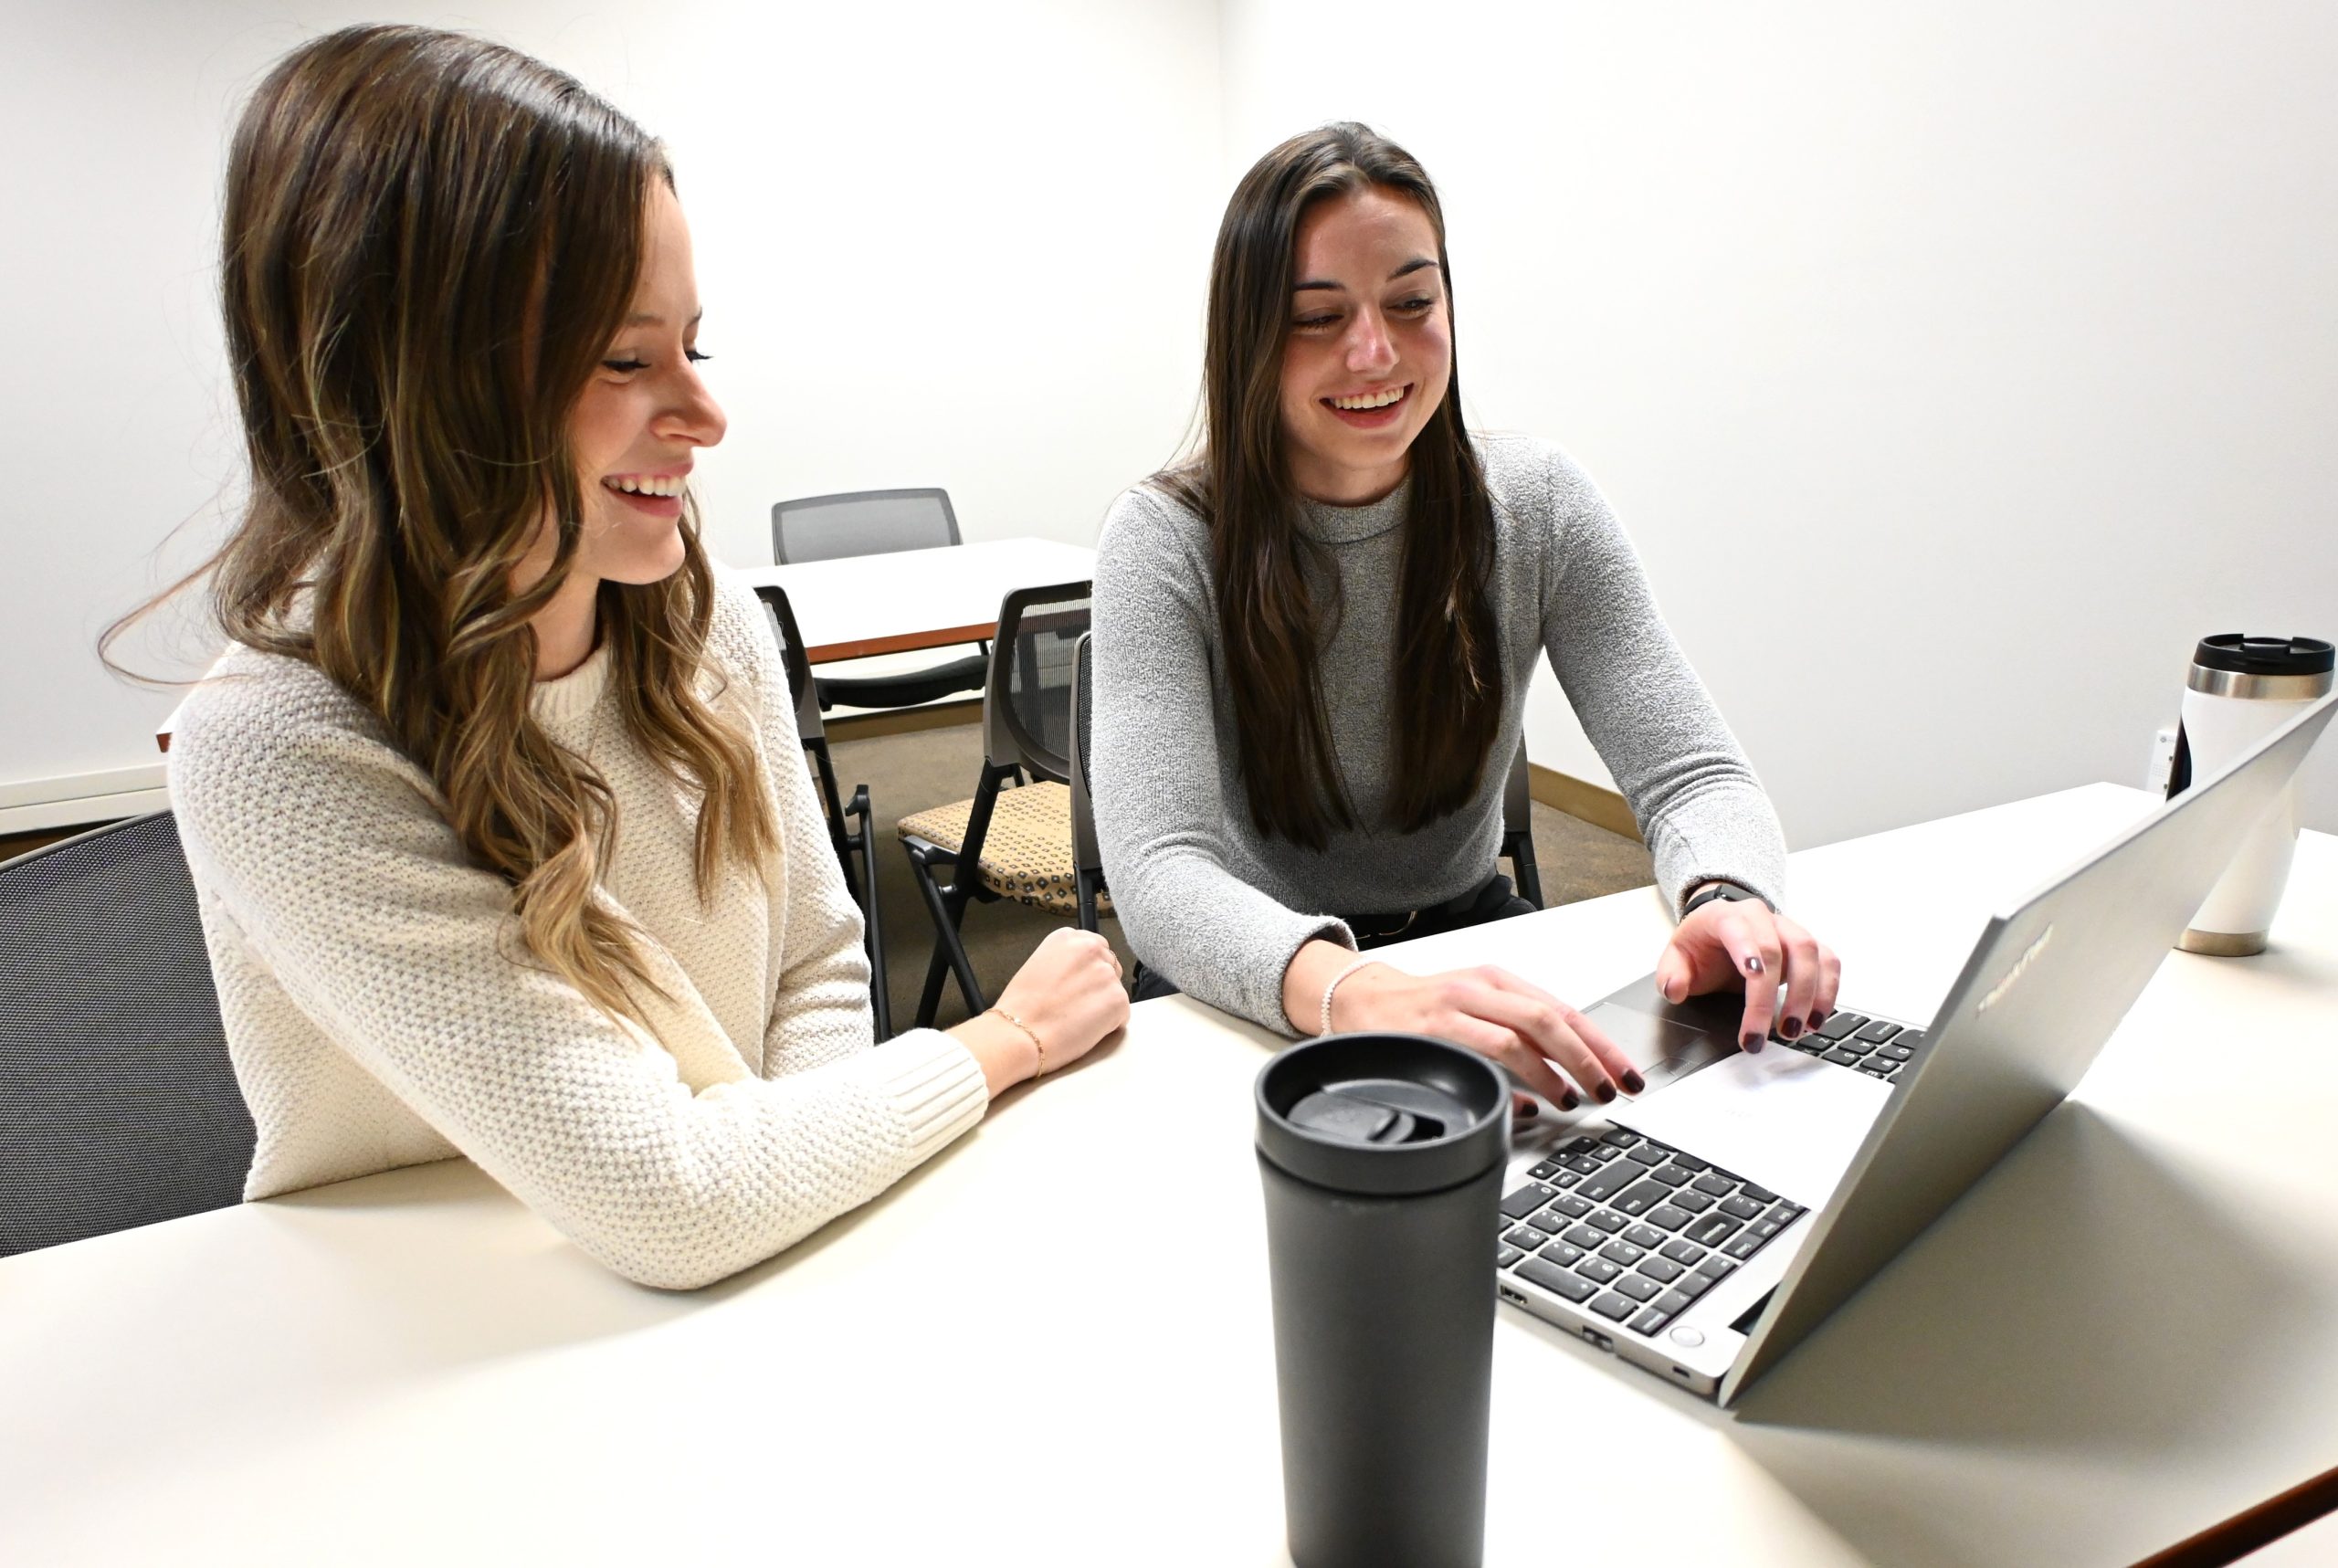 Photo of two women working together in an office setting